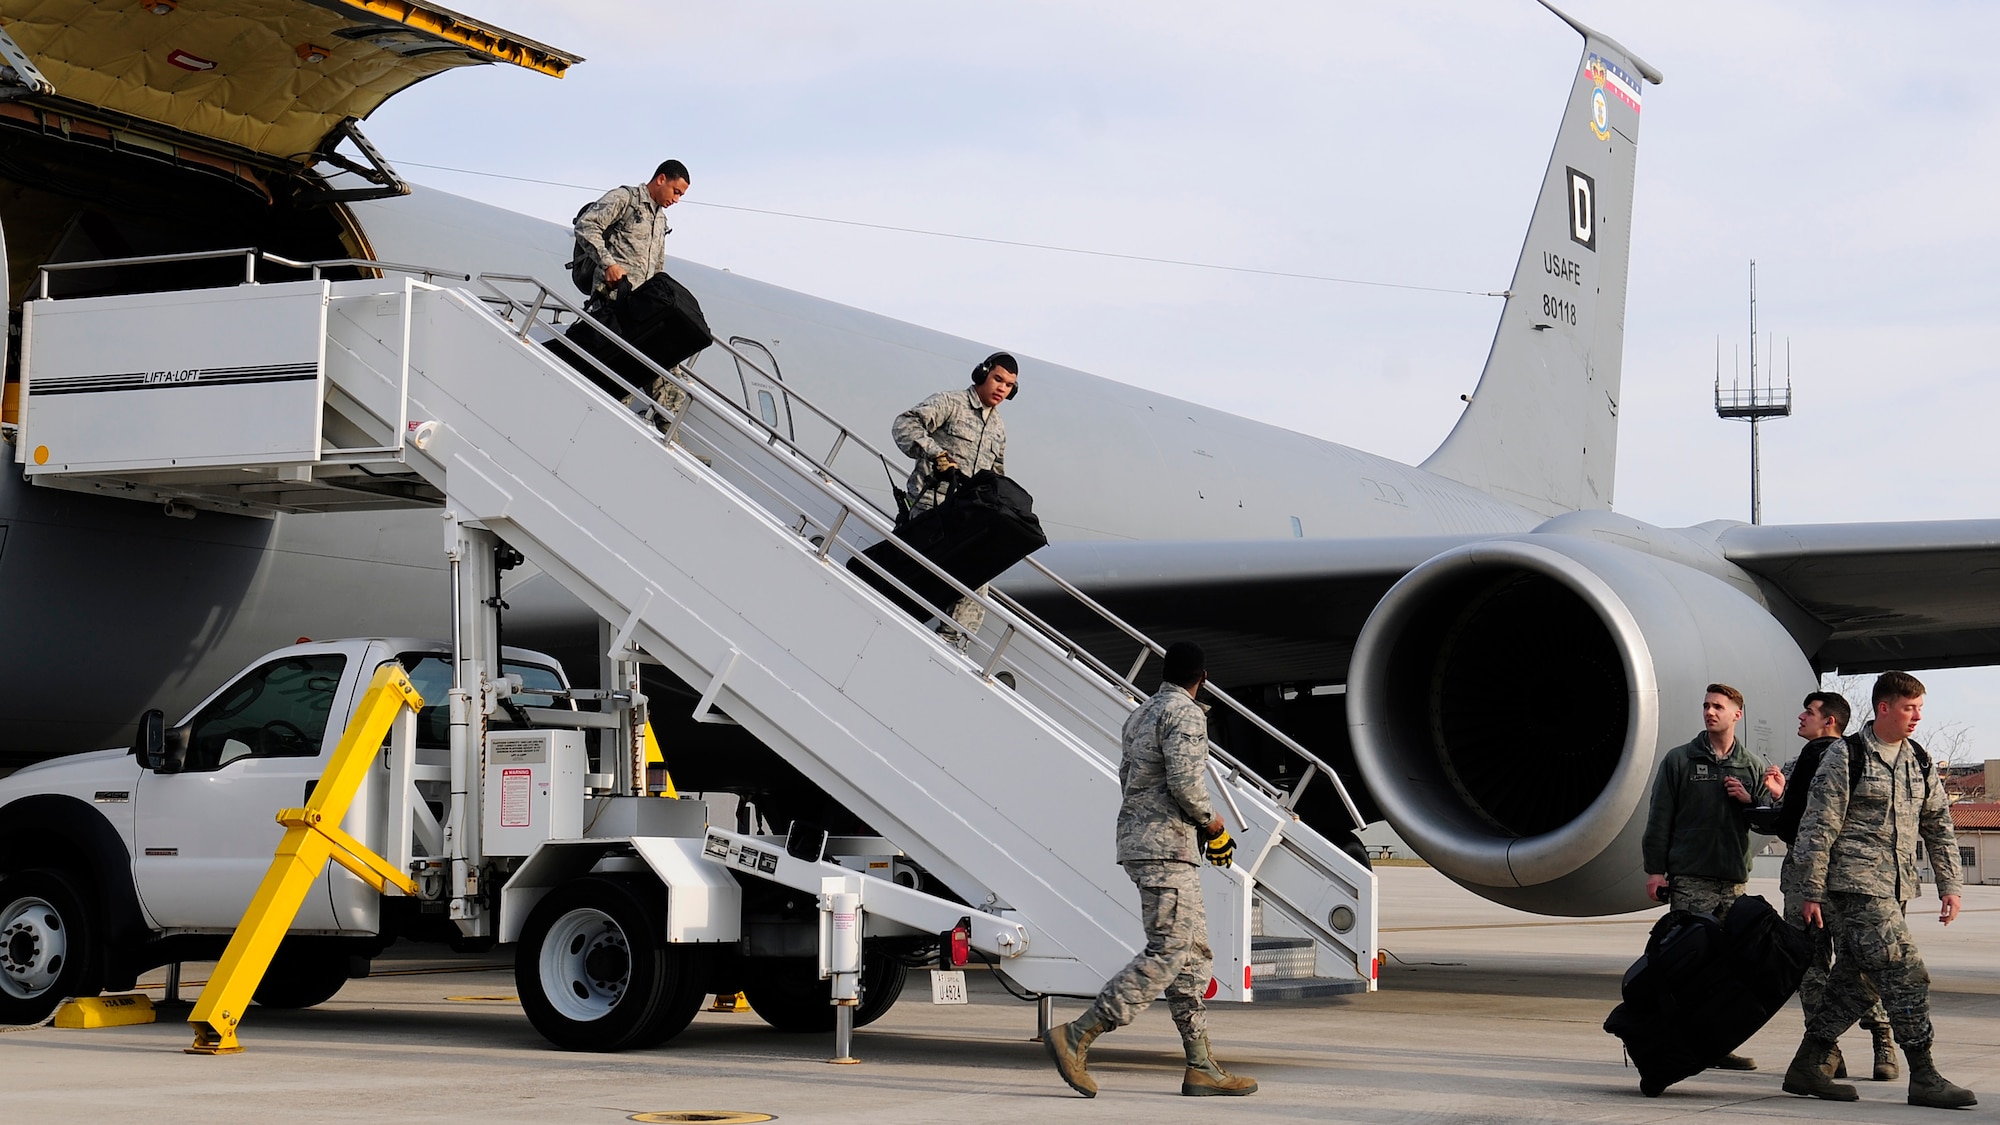 Airmen from the 31st Fighter Wing return to Aviano Air Base, Italy, from Camp Lemonnier, Djibouti, Feb. 9, 2017, after a seven month deployment. In July 2016, the U.S. Air Force forward deployed the 31st FW F-16s, 100th Air Refueling Wing KC-135 Stratotankers from Royal Air Force Mildenhall, United Kingdom, Airmen and equipment to Camp Lemonnier as a precautionary measure to protect Americans and American interests based on violent unrest and the possibility of threats in South Sudan. (U.S. Air Force photo by Staff Sgt. Austin Harvill)